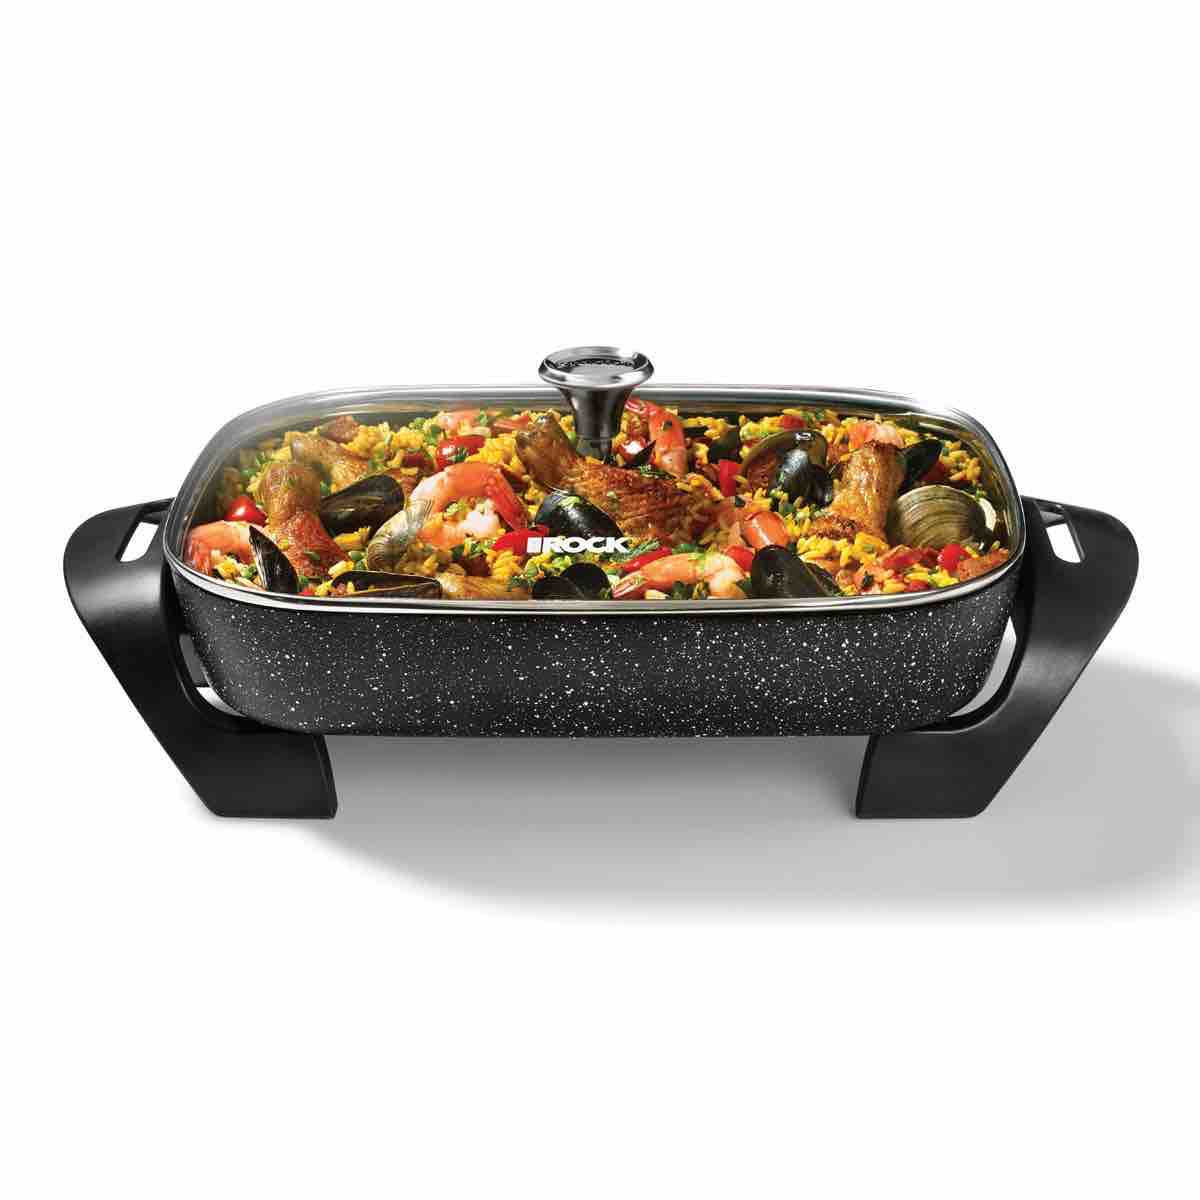 The Rock 12x15" Electric Skillet